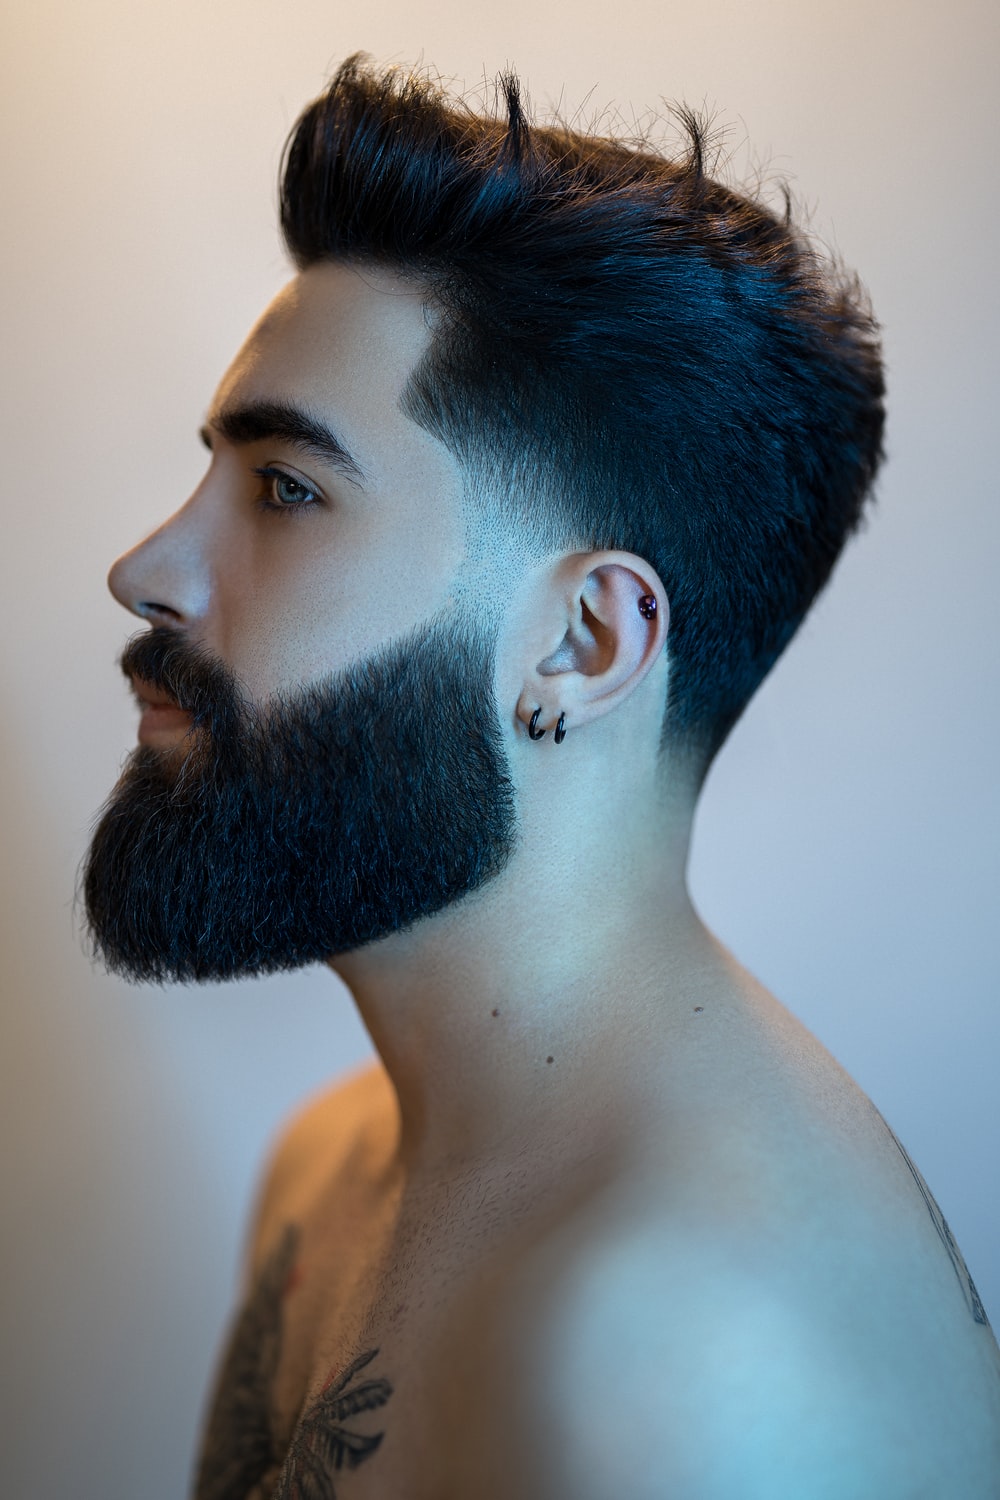 Mens Haircut Picture. Download Free Image